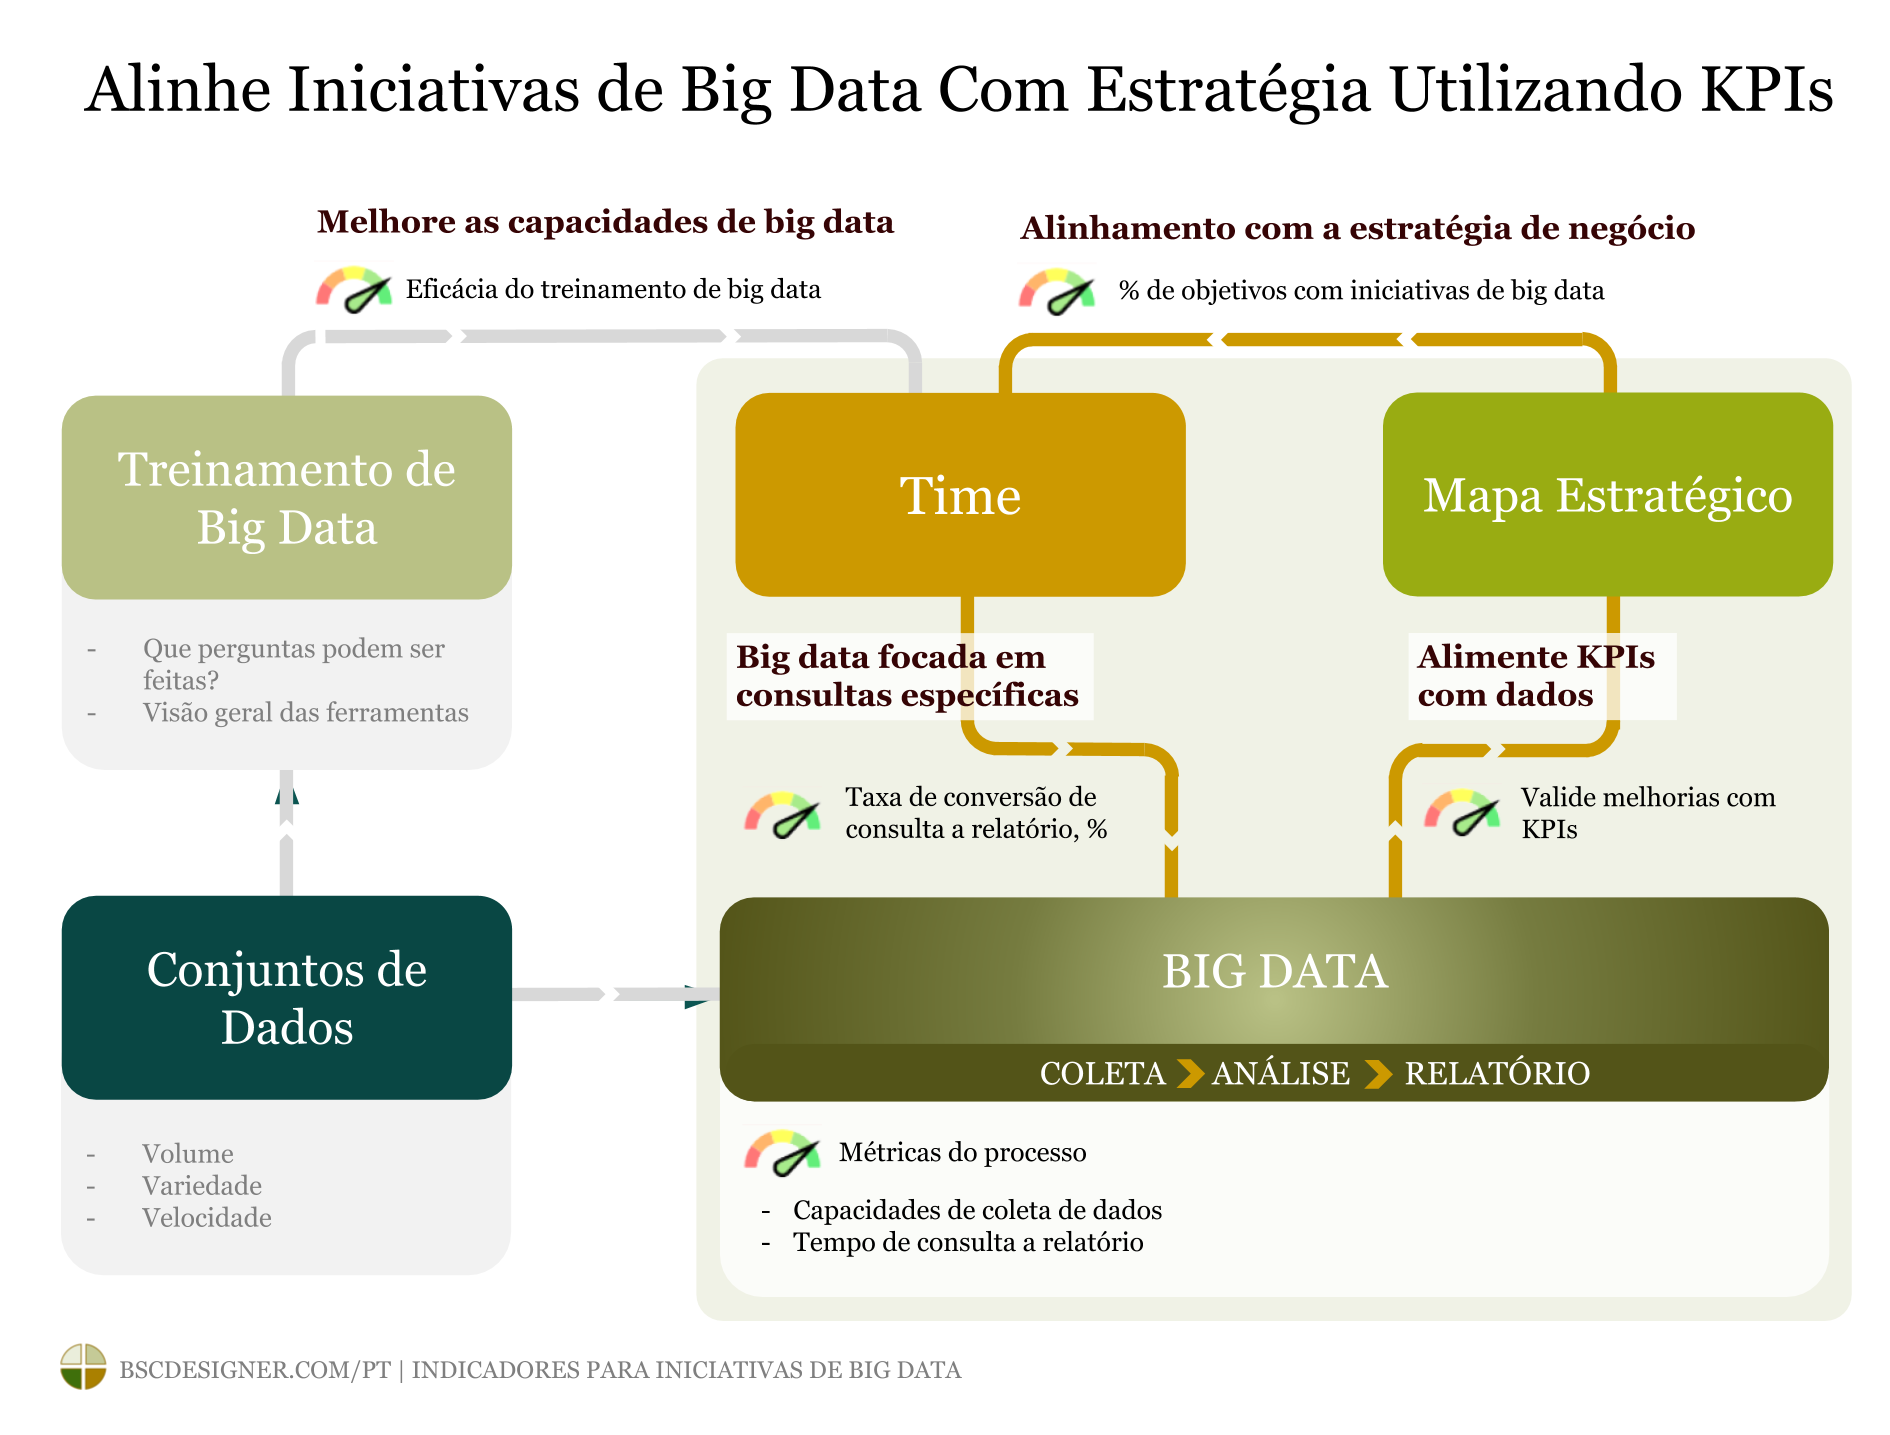 Align Big Data Initiatives with Strategy Using KPIs